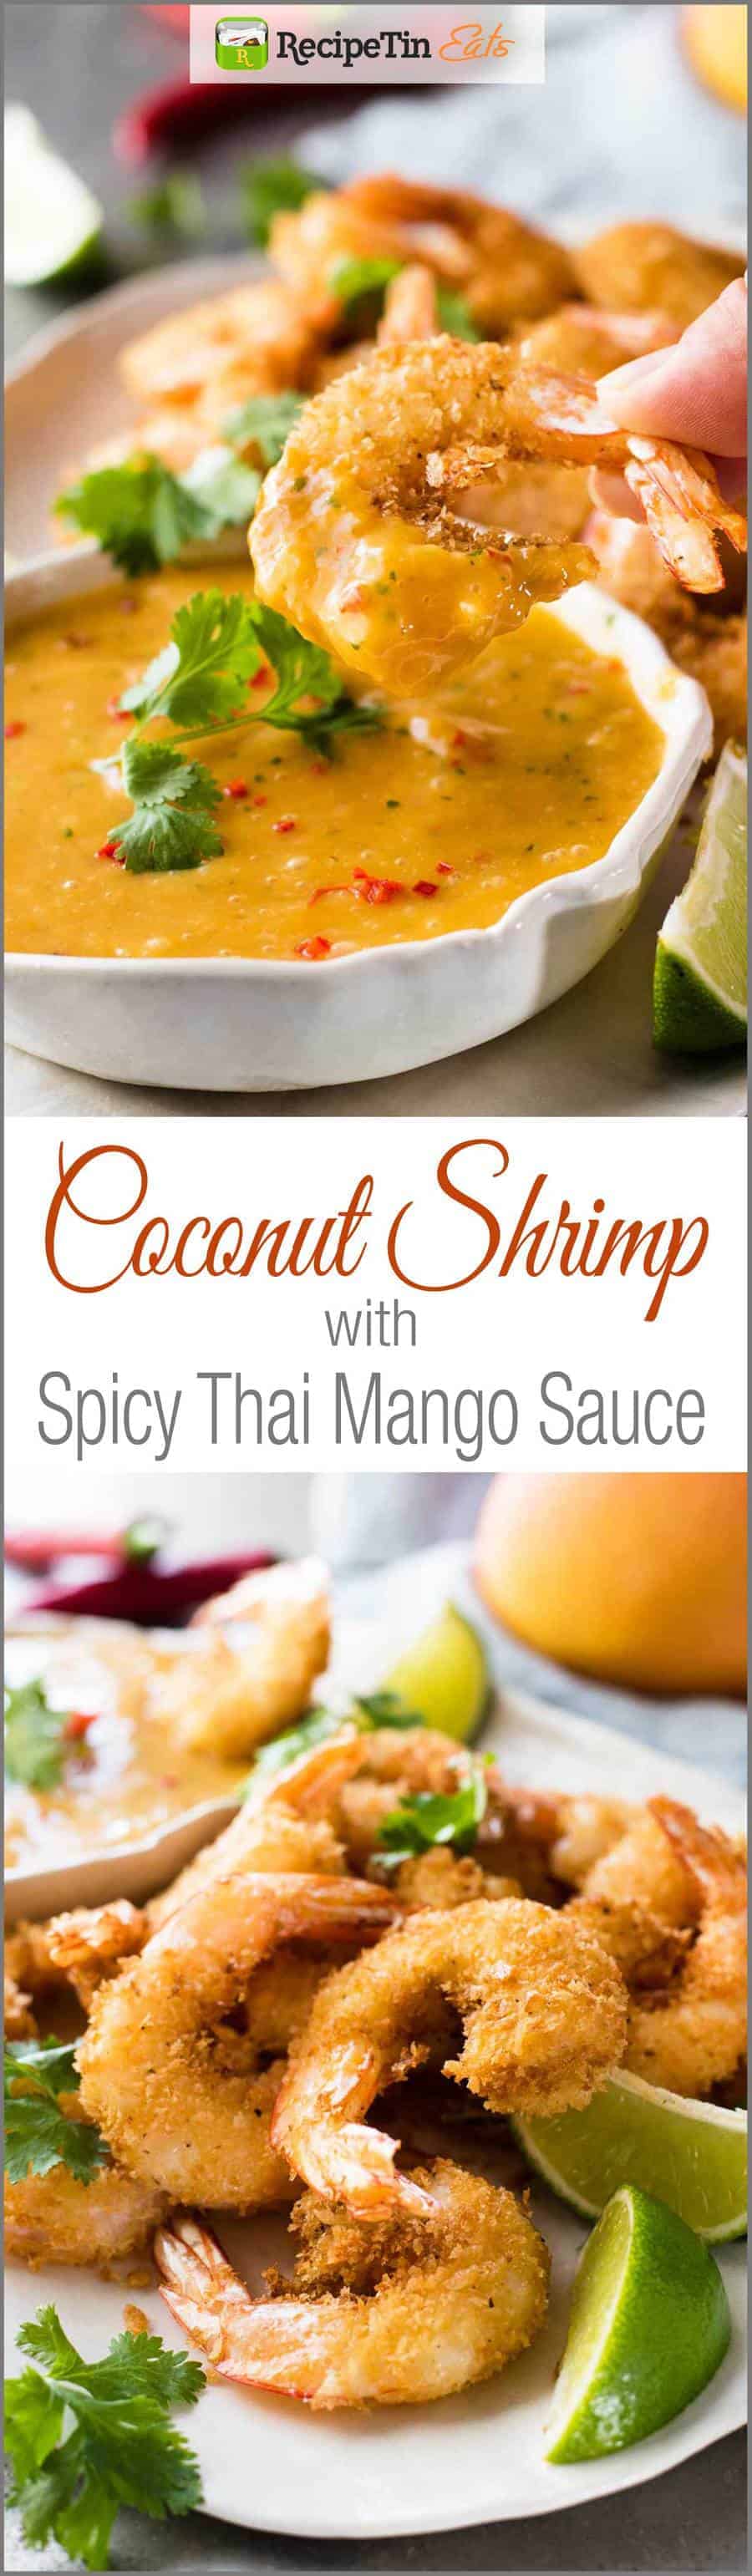 Coconut Shrimp / Prawns with Spicy Thai Mango Sauce - Crunchy shrimp / prawns with a Thai Mango Sauce that's so good you will want to put it on everything!